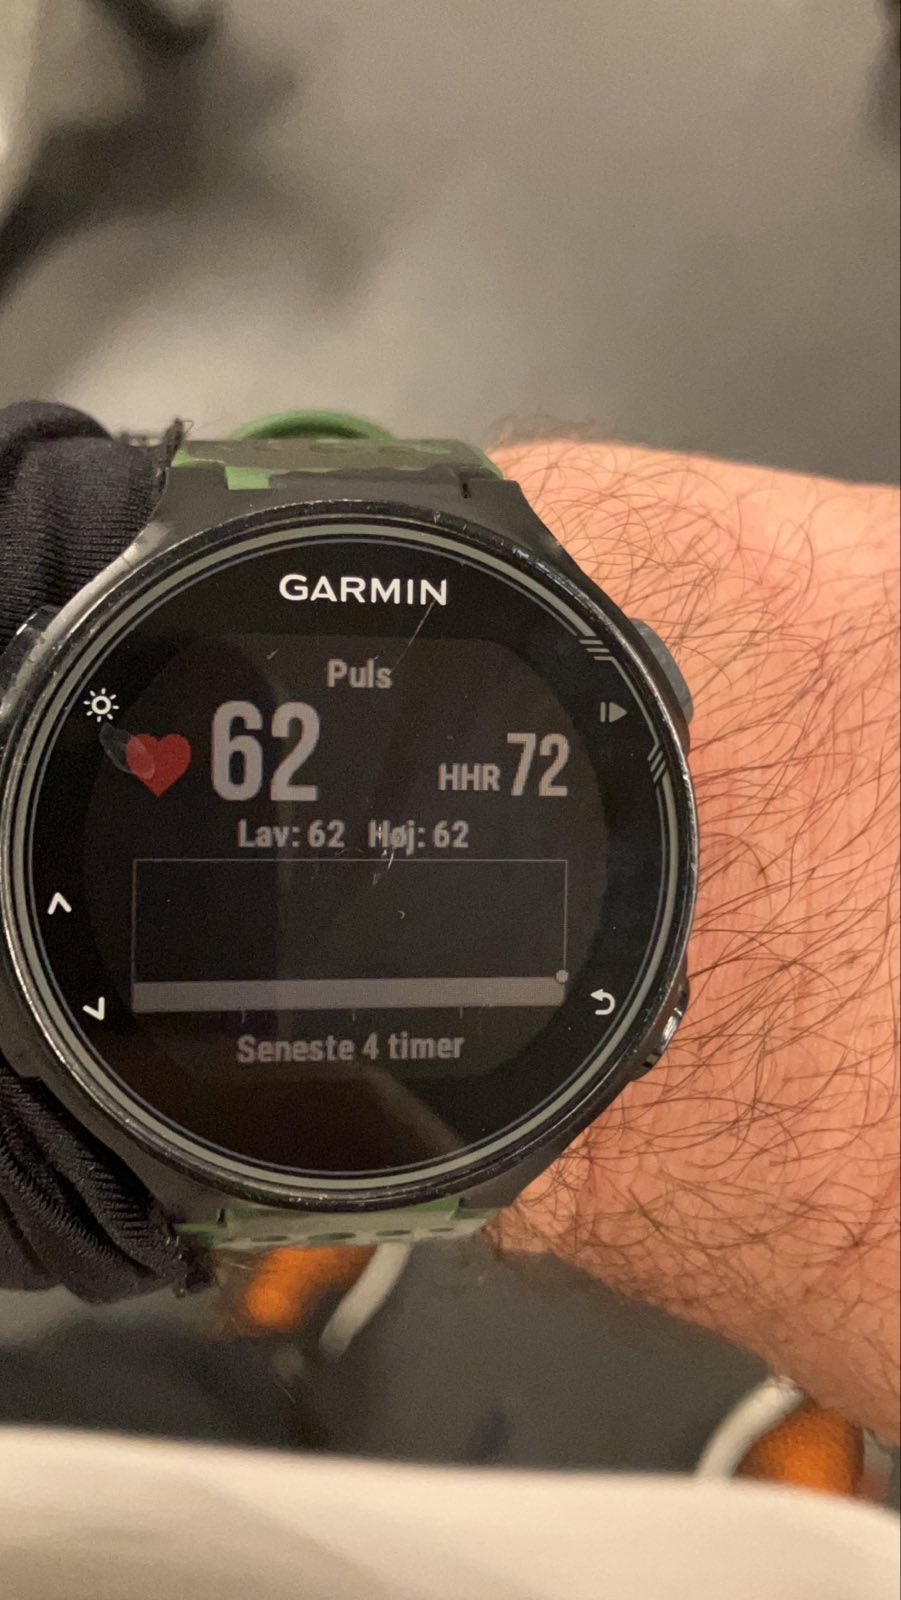 gør ikke halvø præsentation Garmin on Twitter: "@TNKYMNKY I'd be happy to answer any questions or  concerns you have about your Garmin watch! Please send us a direct message  with the following information. - Serial number